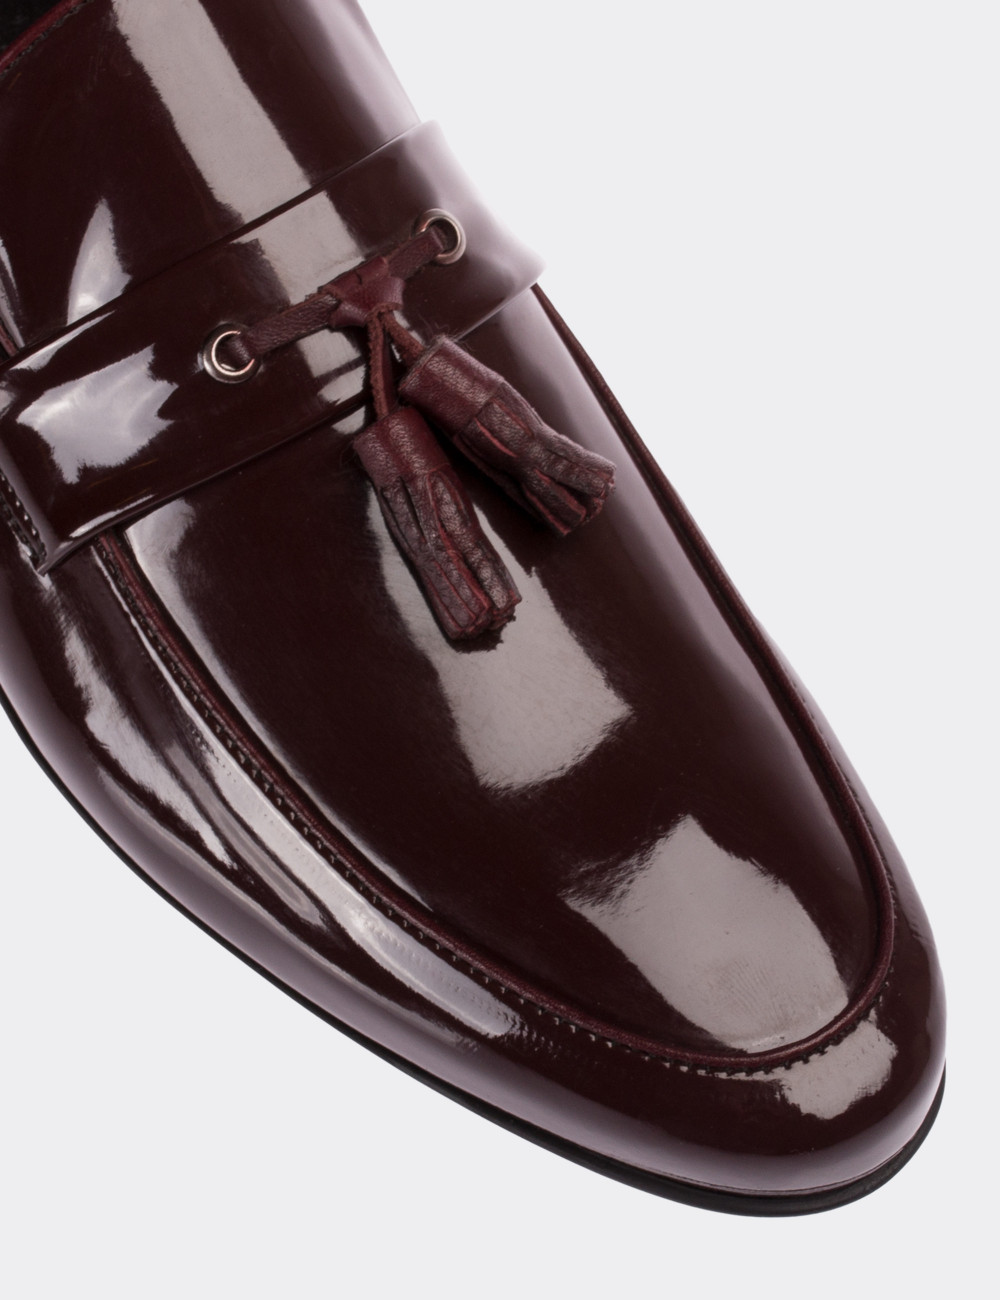 Burgundy Patent Leather Loafers - 01537MBRDC01